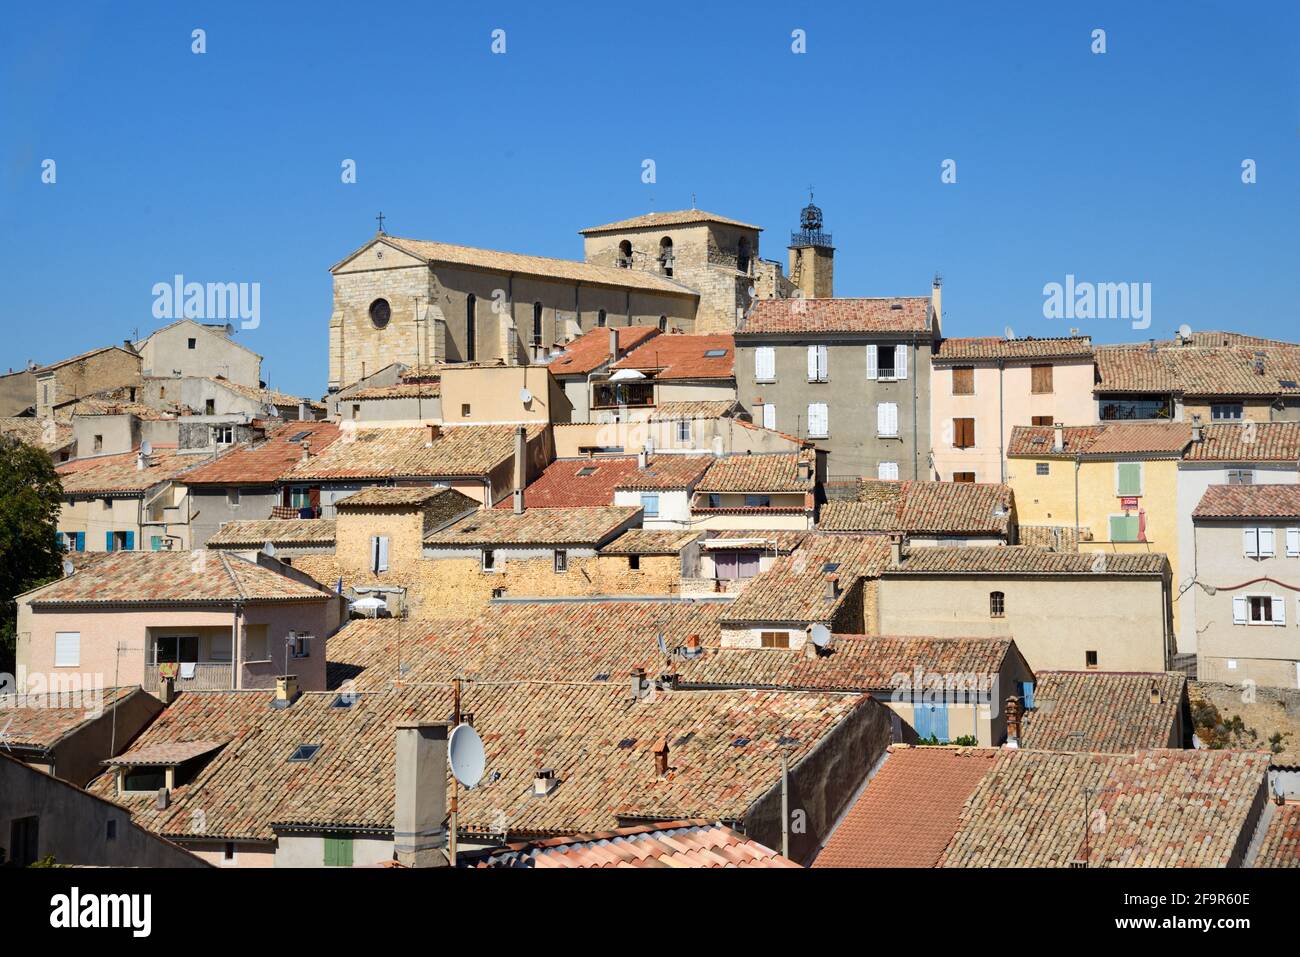 View over the Village Rooftops, Terracotta Roofs, Church, Old Town & Historic District of Valensole Alpes-de-Haute-Provence Provence France Stock Photo